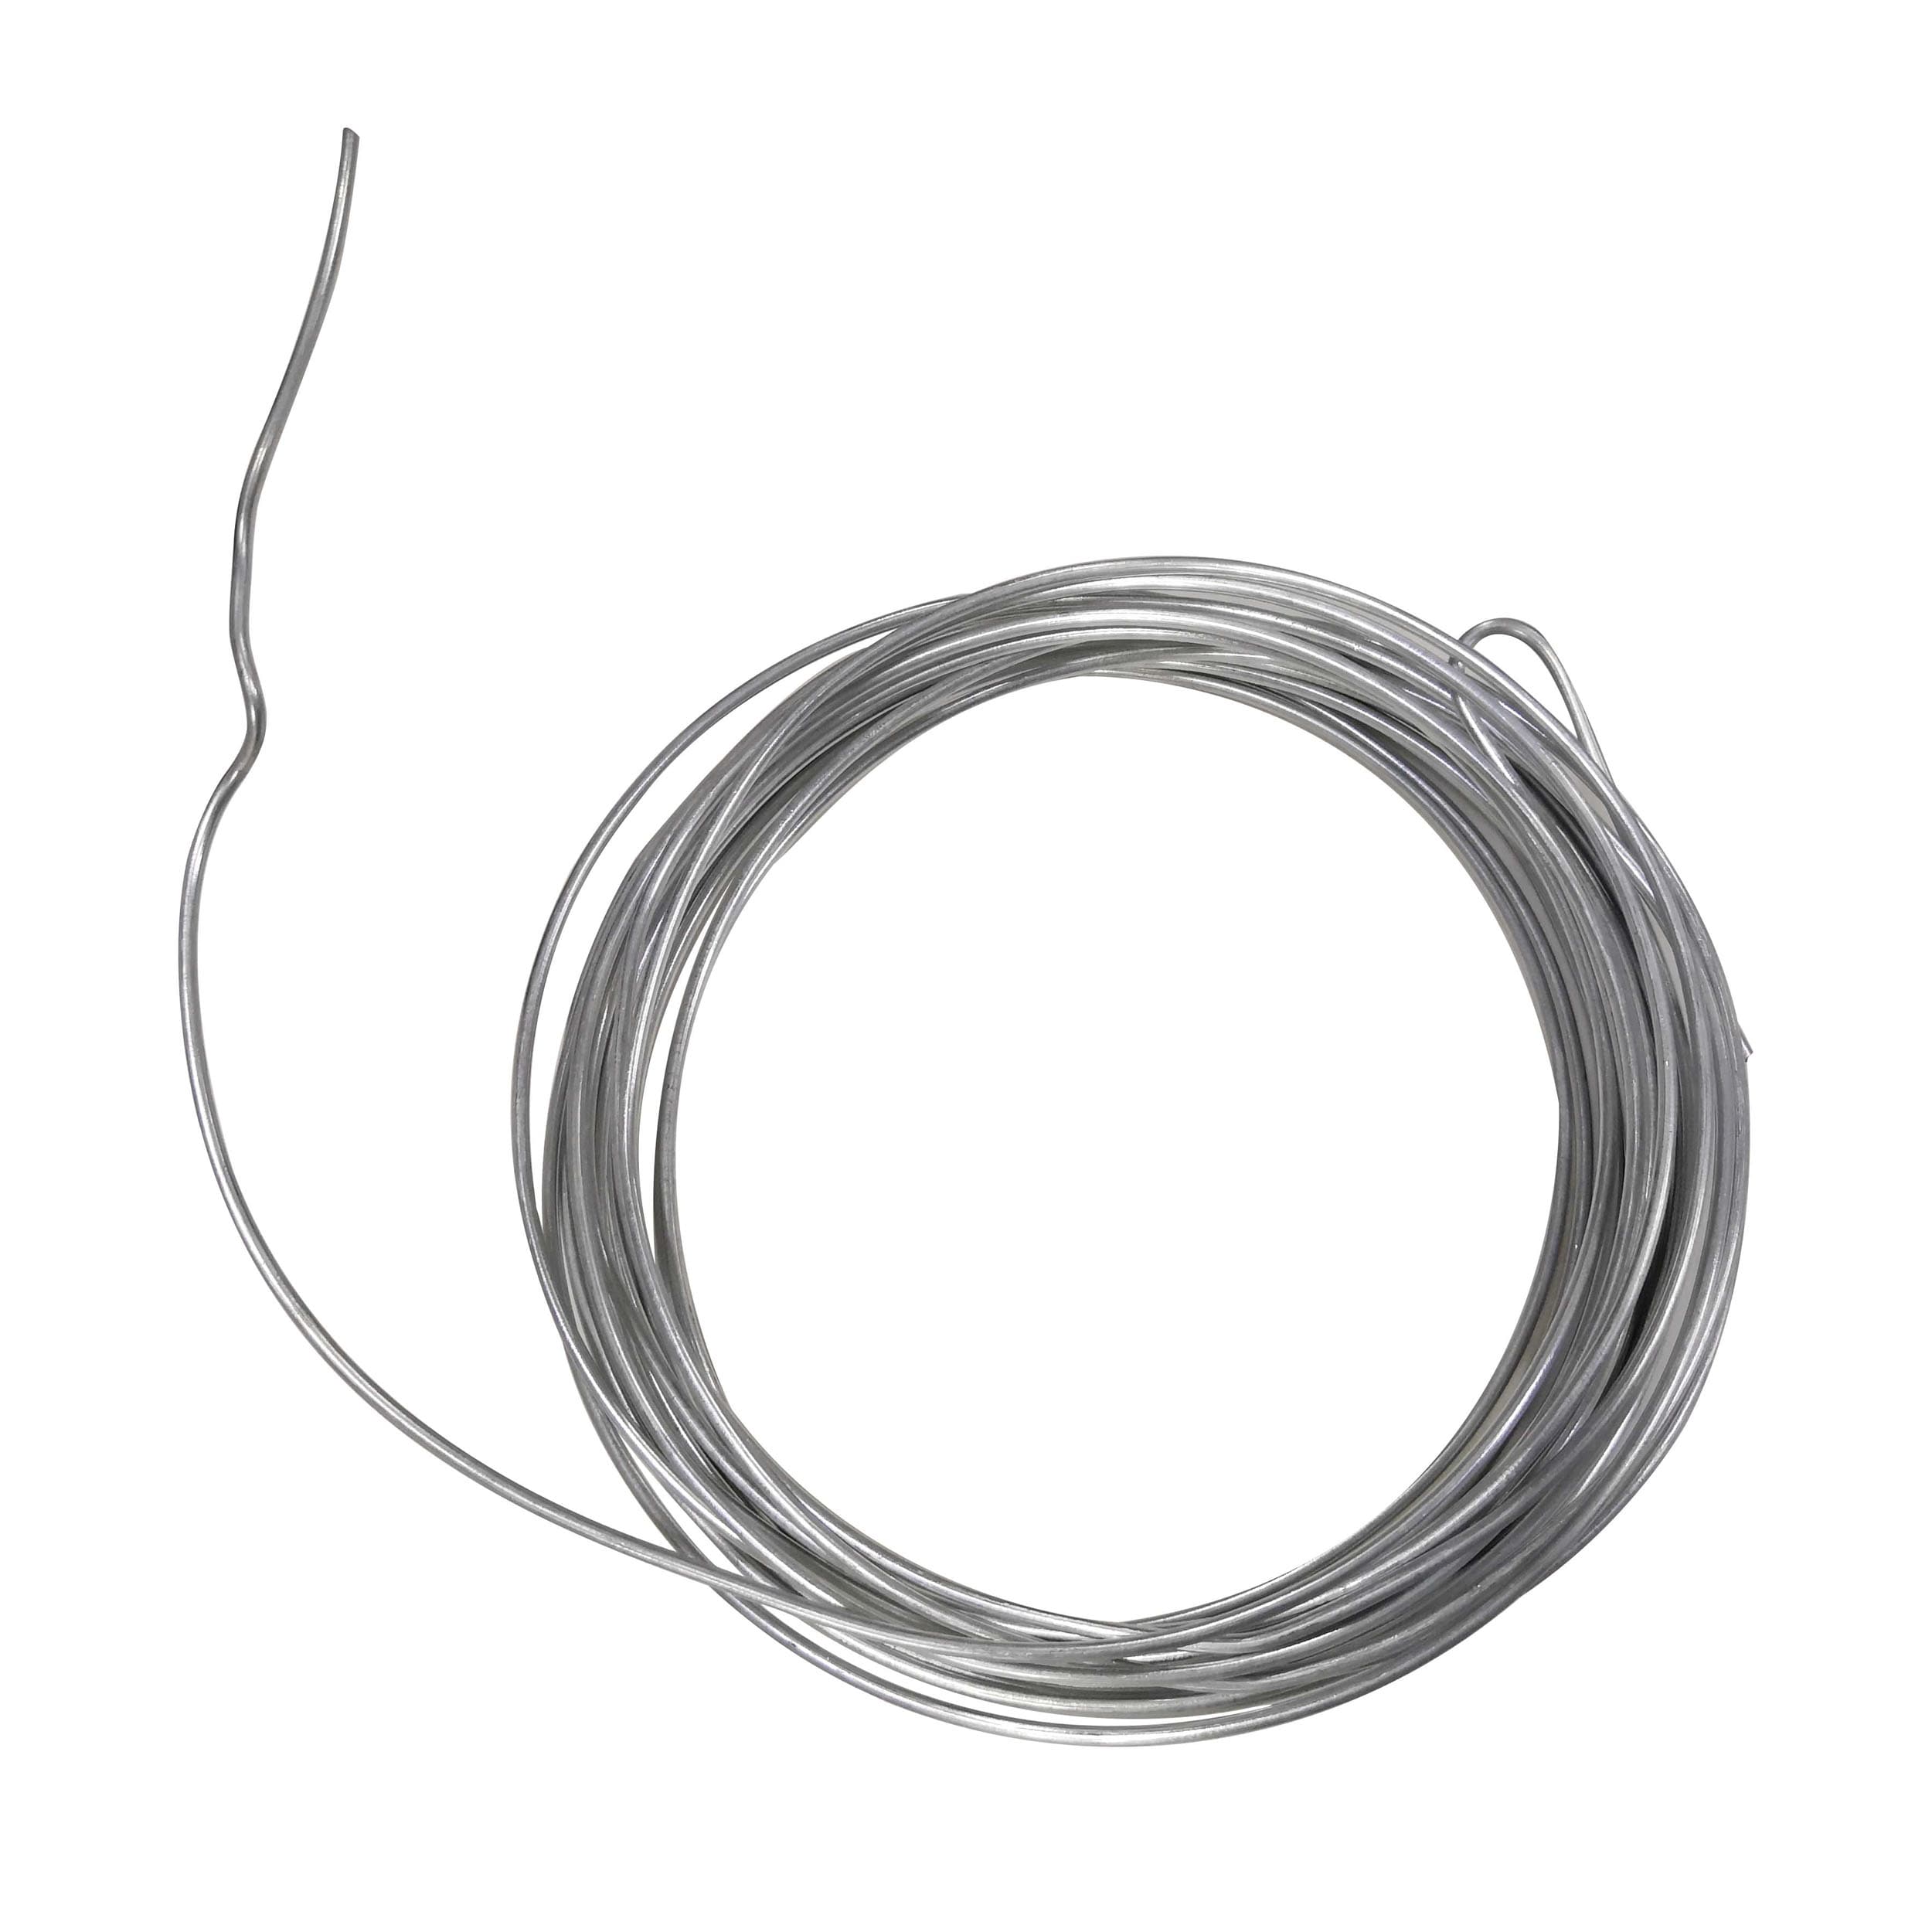 Vinyl Coated Picture Hanging Wire #4 100-Feet Braided Picture Wire  Heavy,Supports up to 50lbs for Photo Frame Picture,Artwork,Mirror  Hanging(1.5mm x